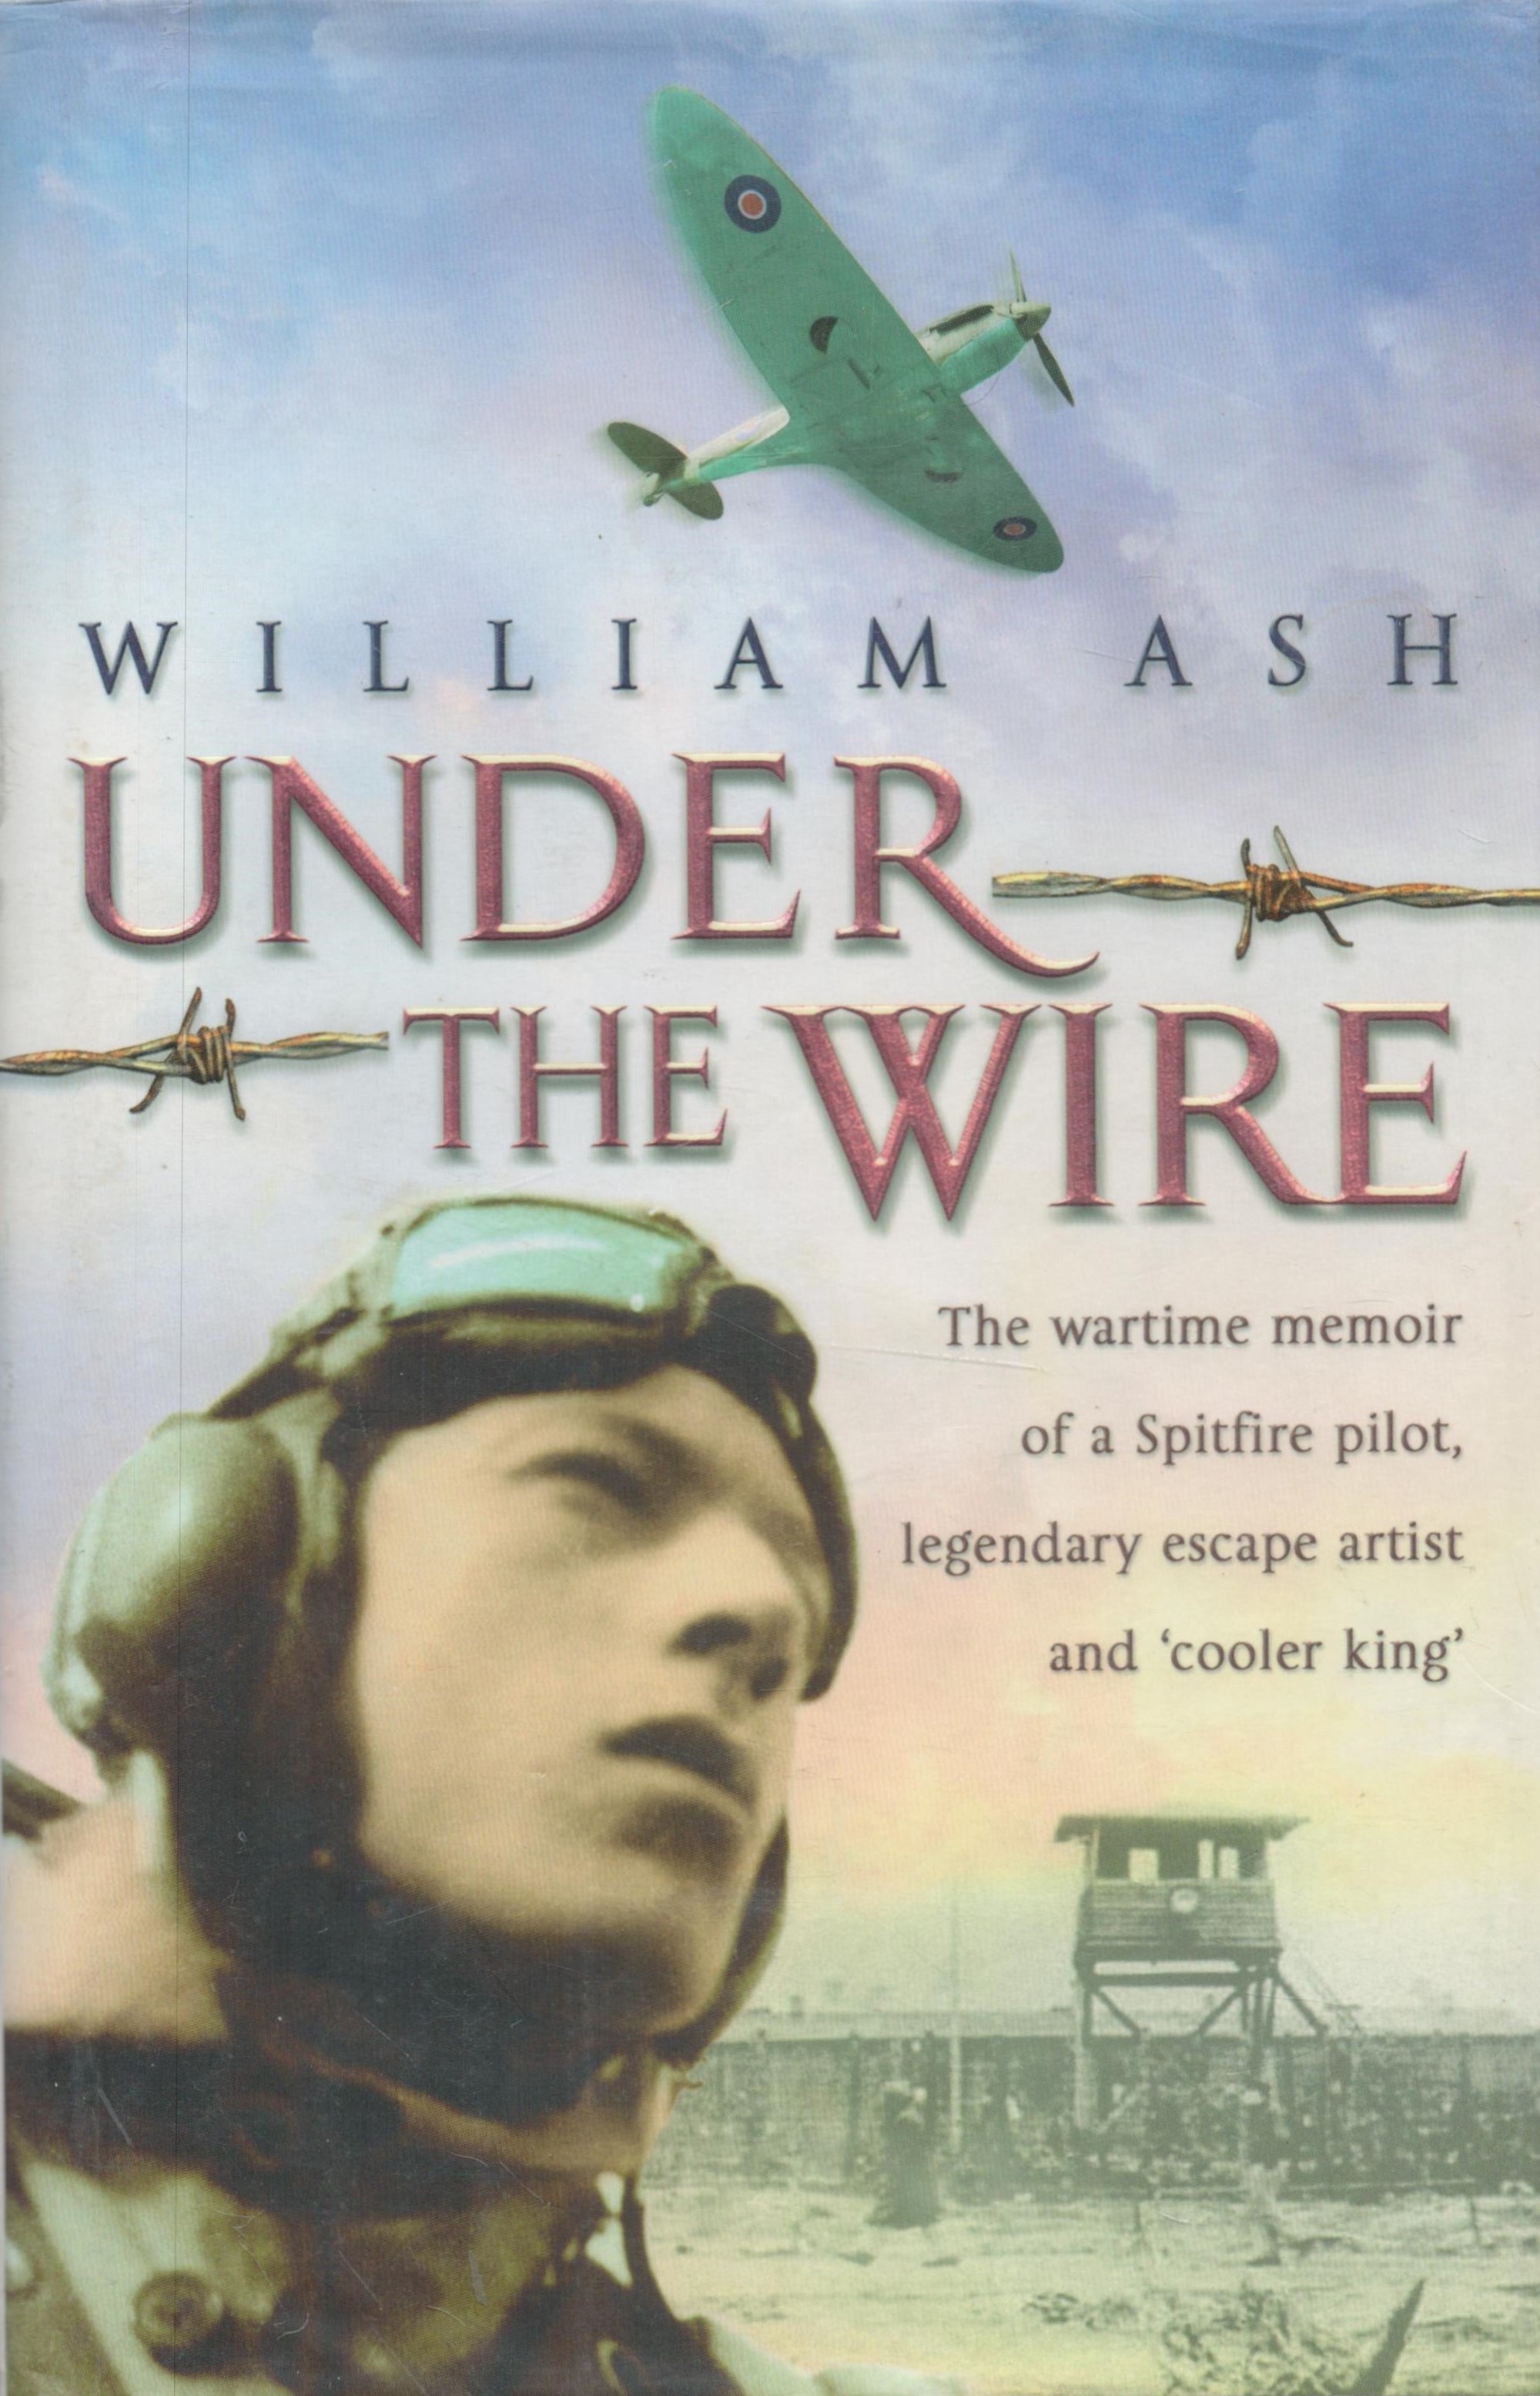 WW2 Flt Lt William Tex Ash Signed 1st Ed Hardback Book Titled Under the Wire by Tex Ash. Signed on a